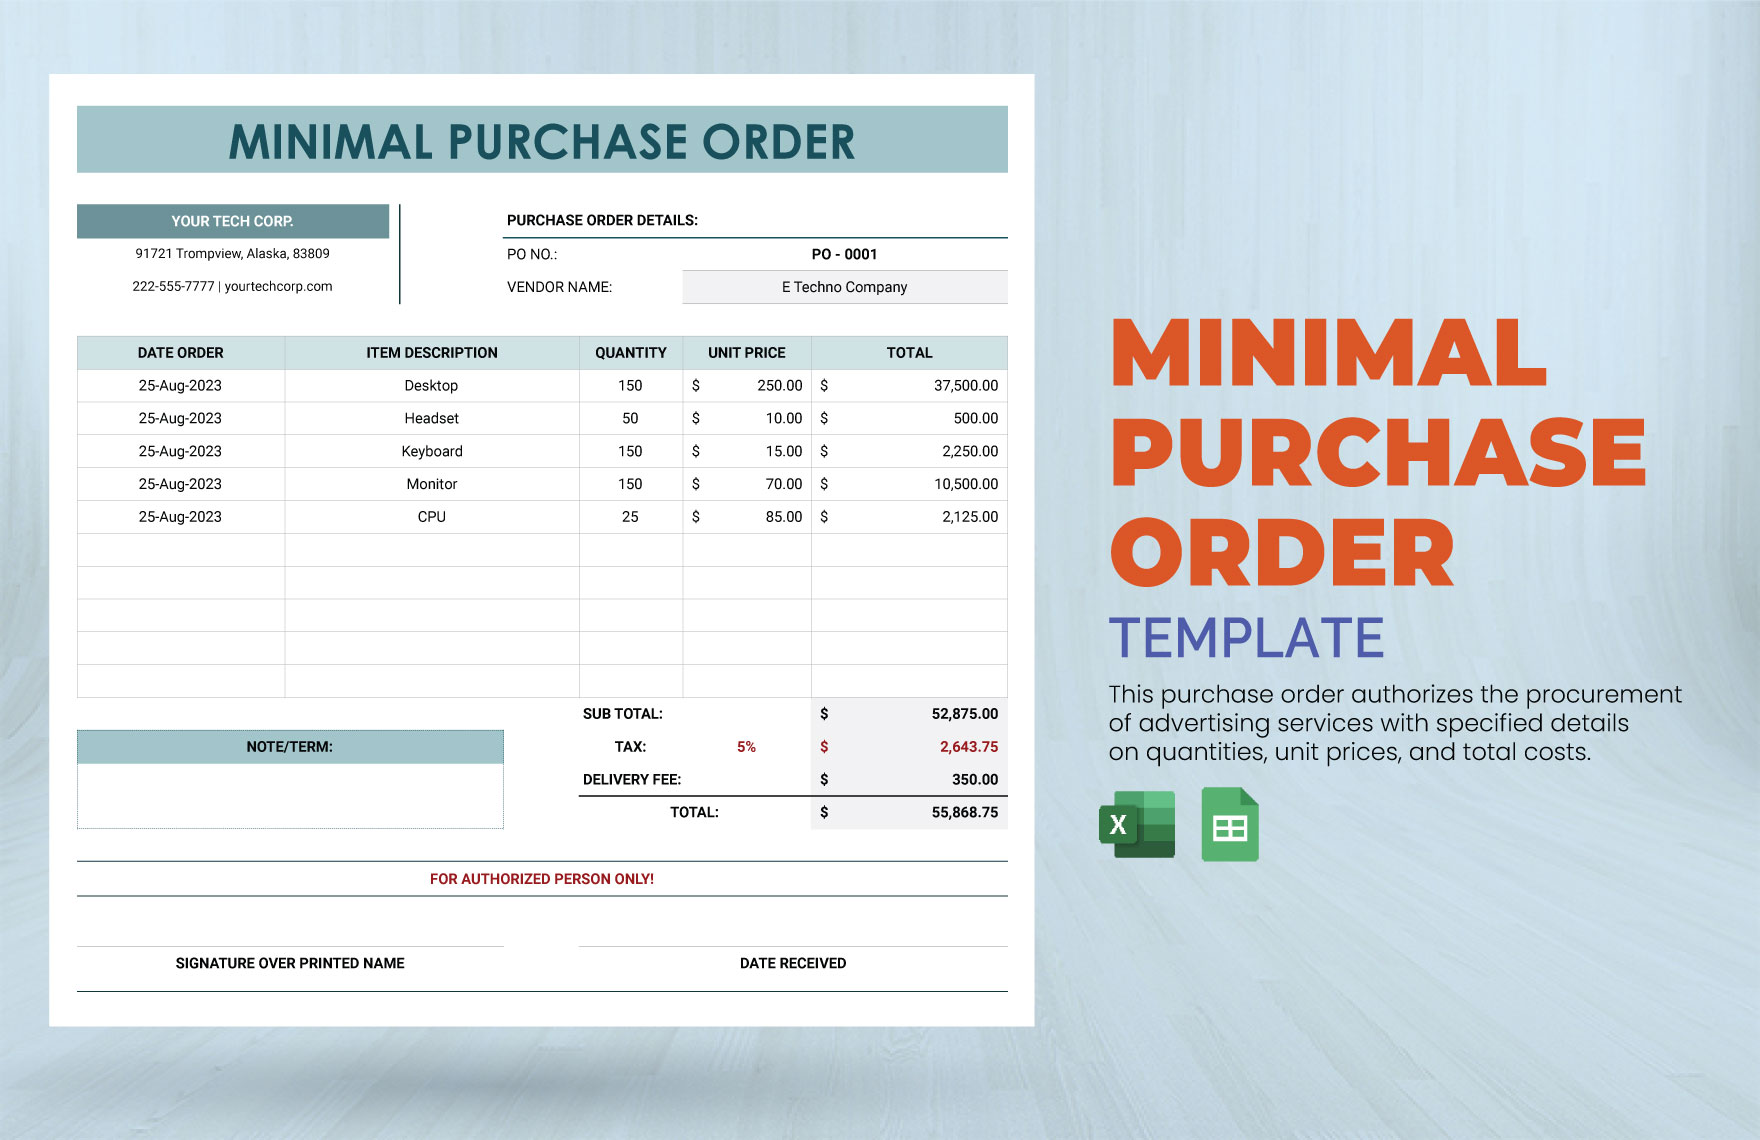 Minimal Purchase Order Template